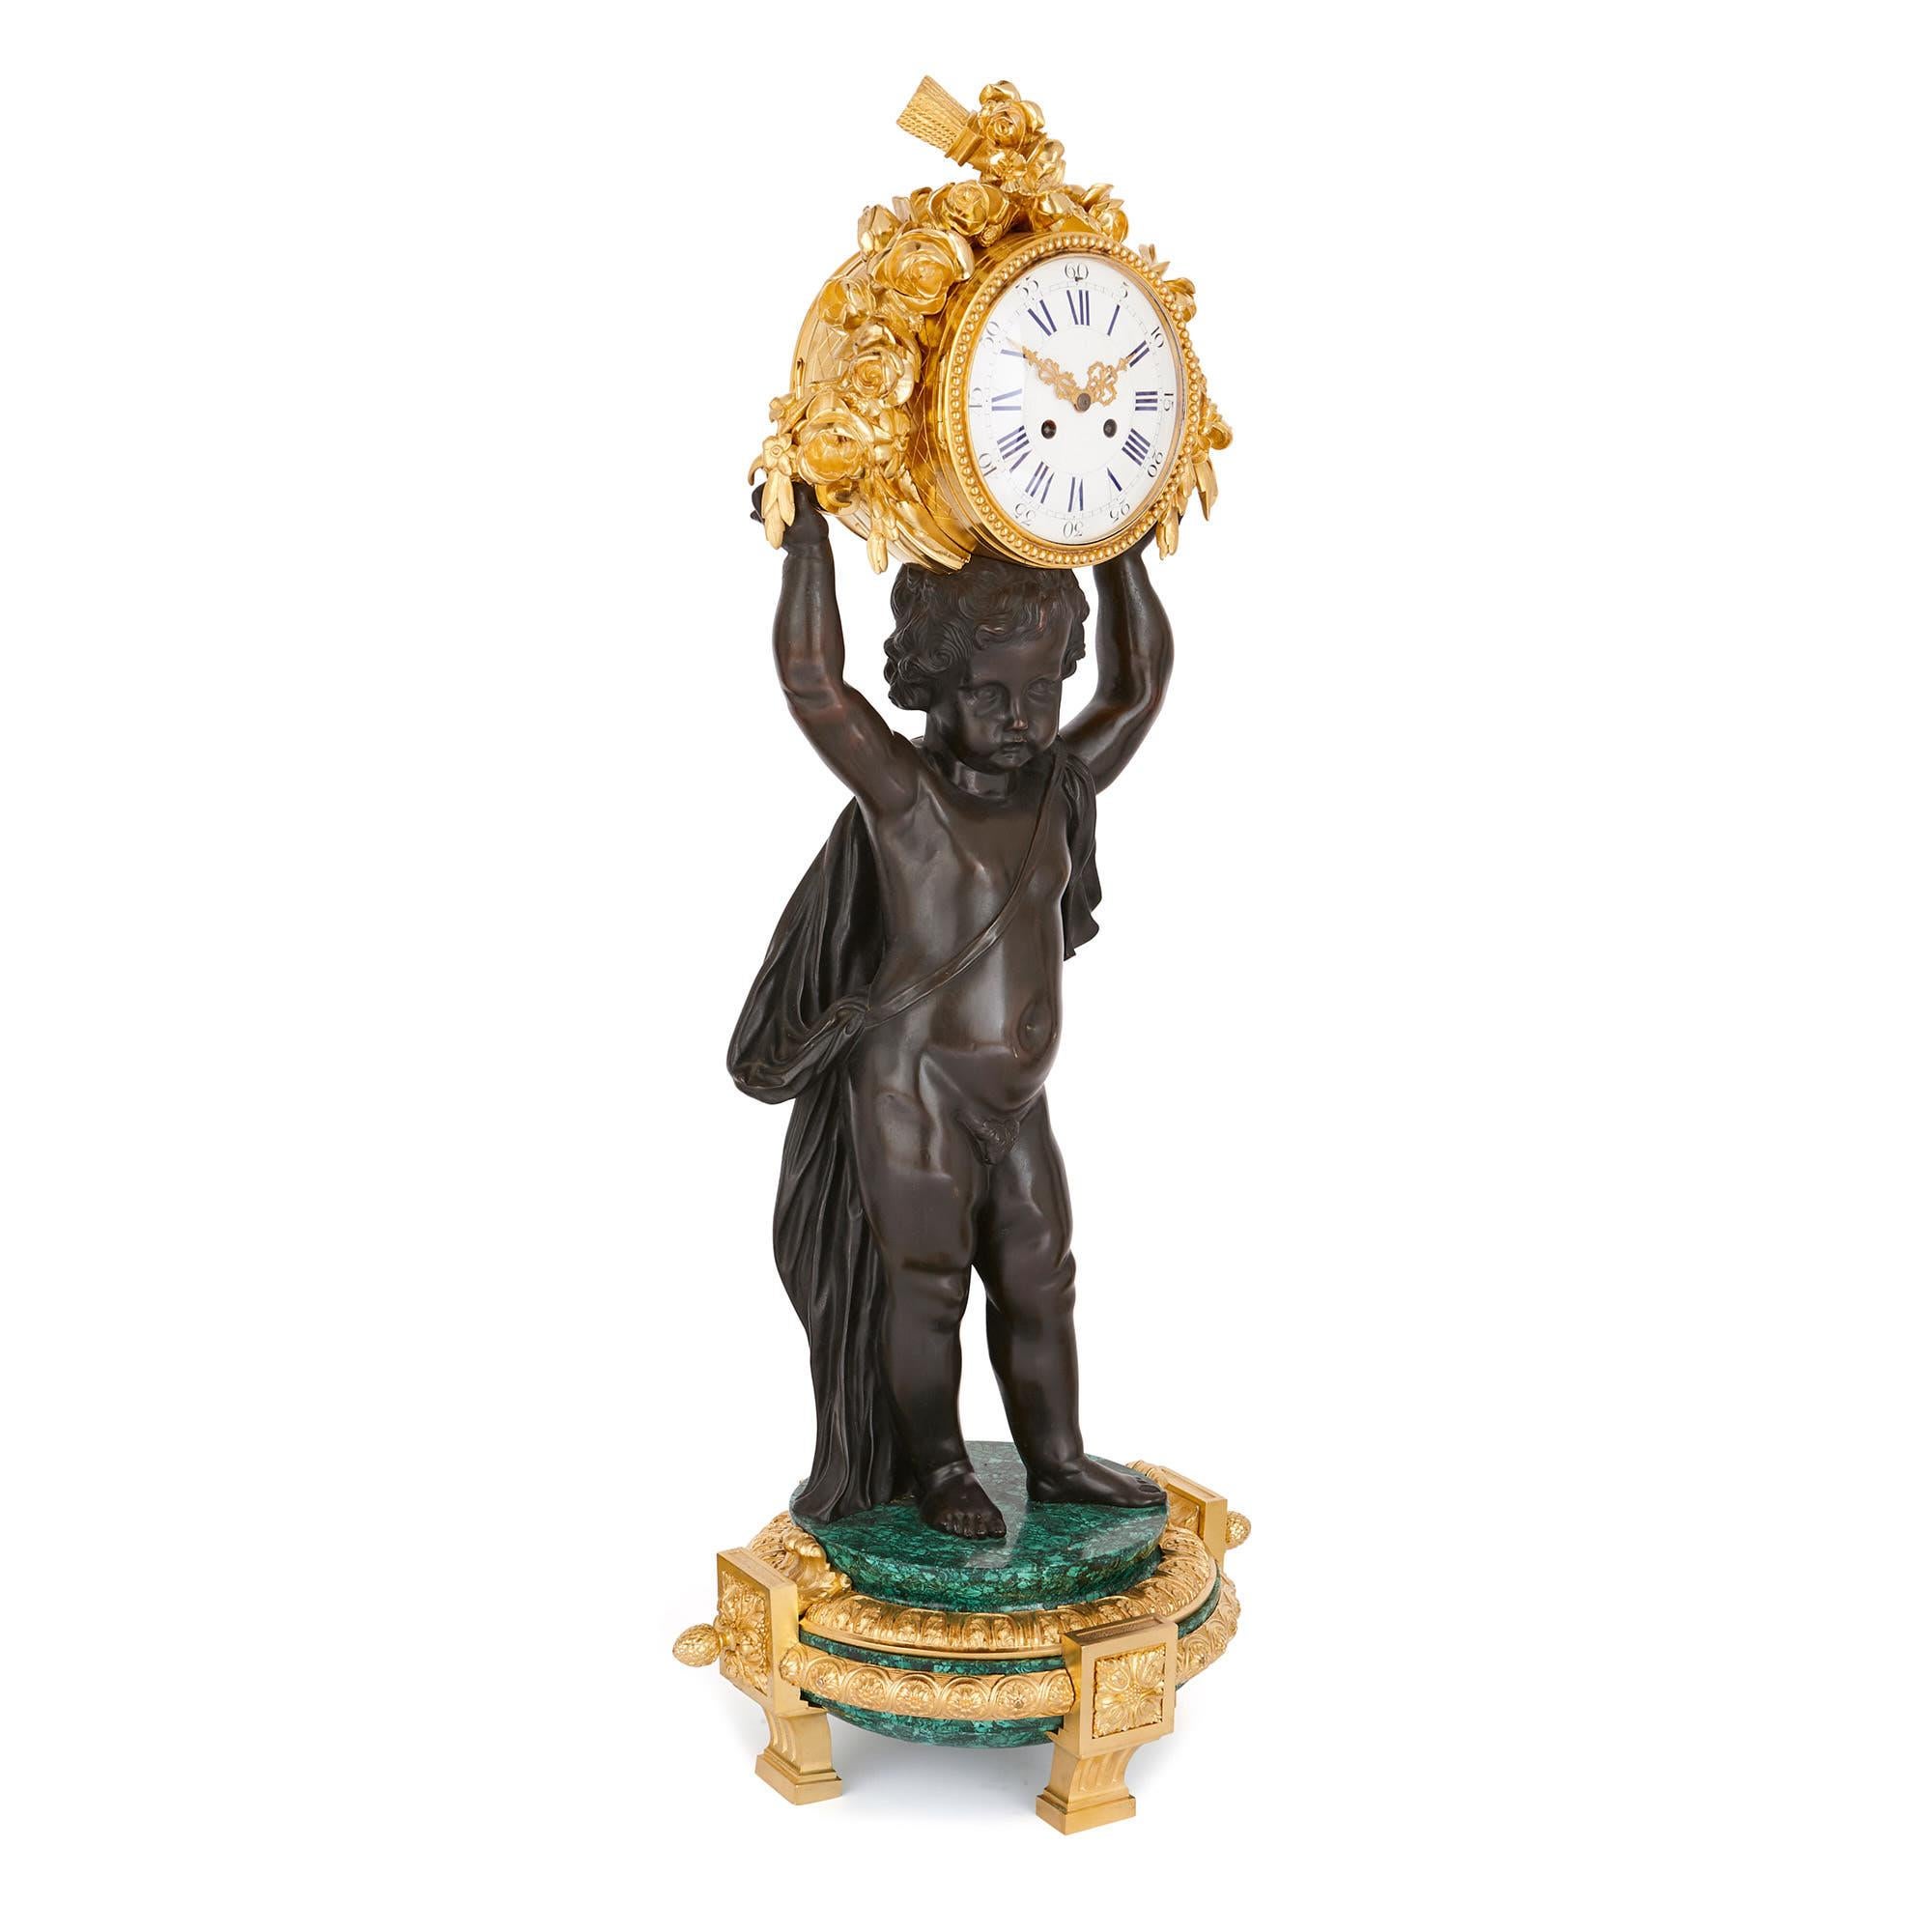 This majestic, neoclassical style clock set – the clock of which measures 1m and the candelabra 1m 11cm in height – will make a bold statement in an interior. With its magnificent patinated bronze putti, the design transcends the boundaries between